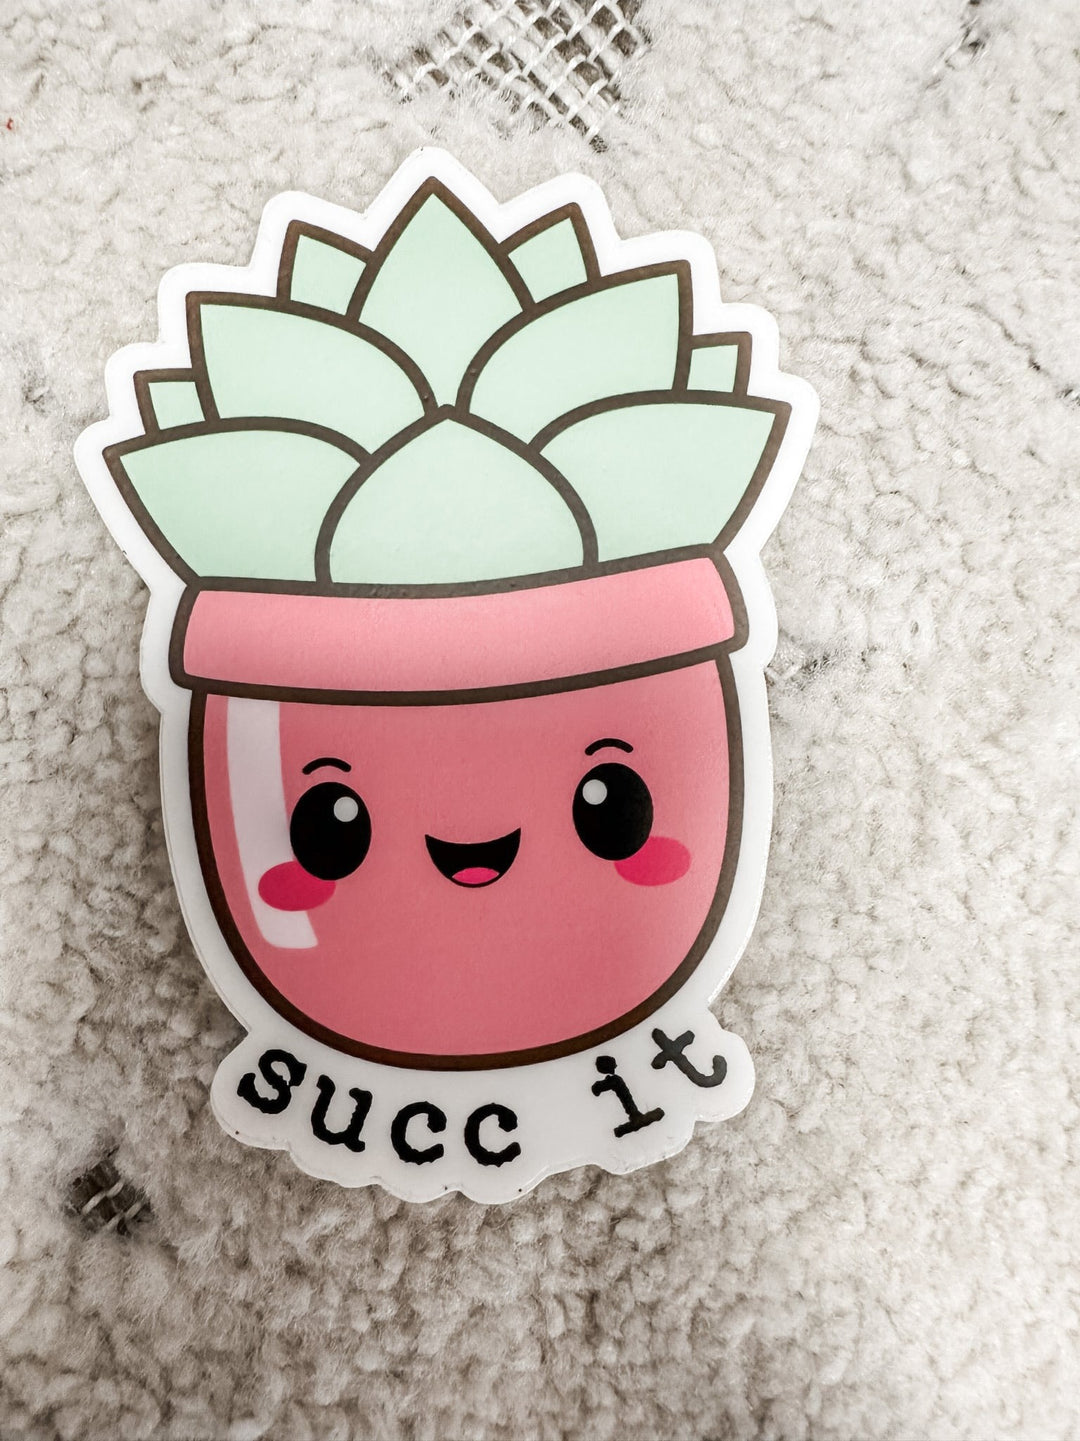 Succ It Sticker - The Teal Antler Boutique